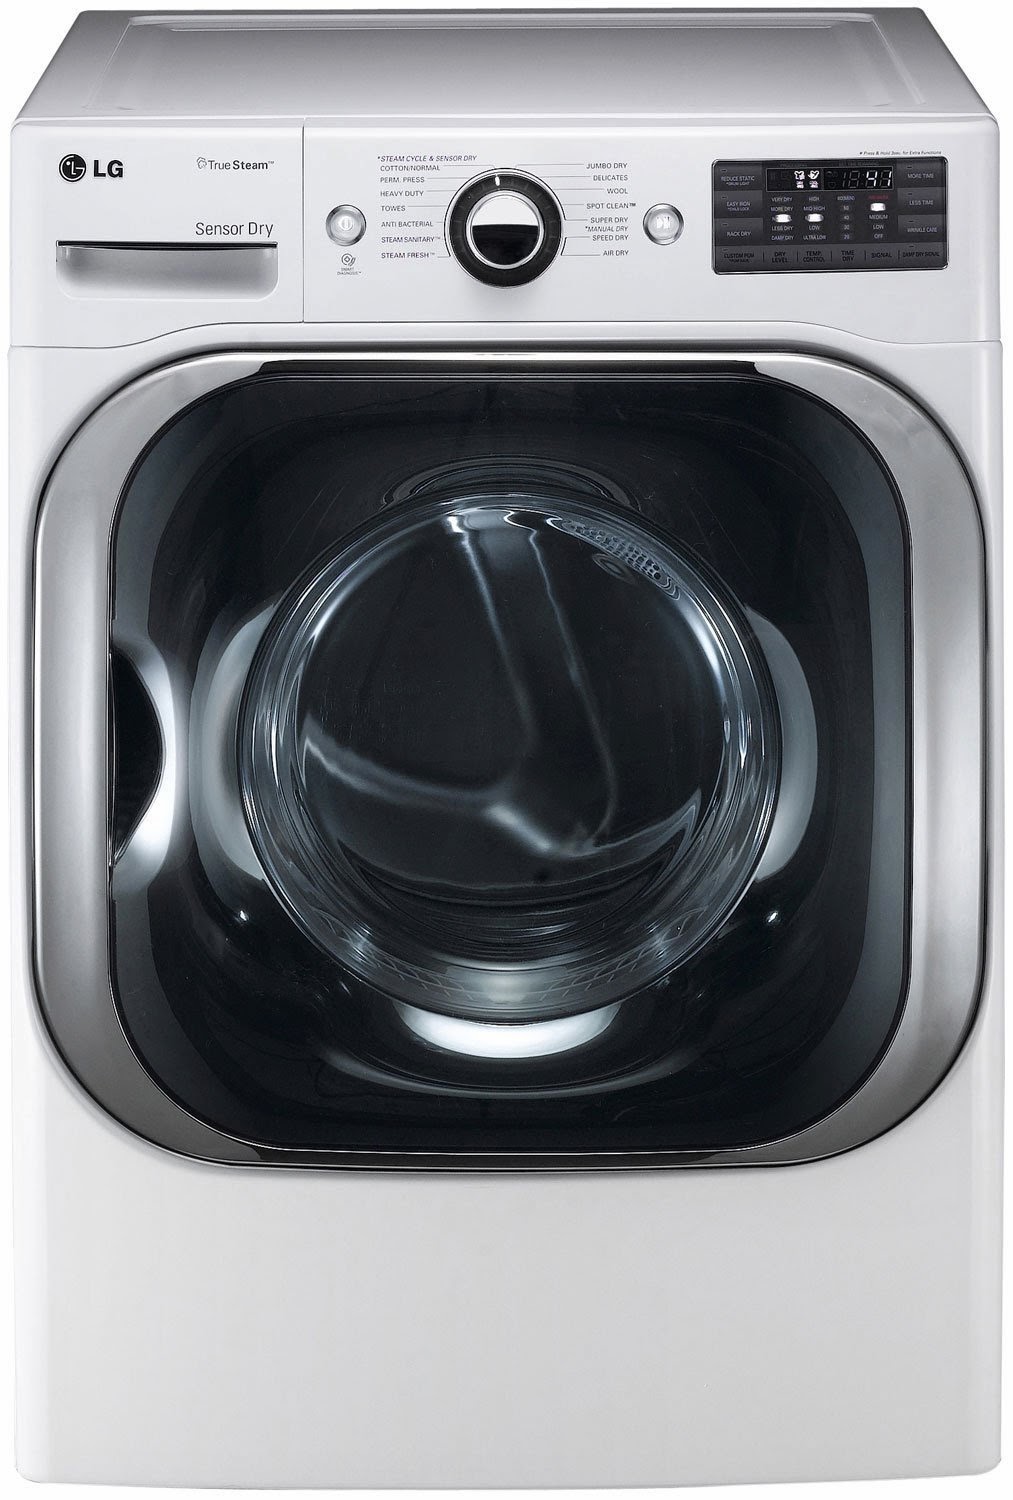 lg-washer-and-dryer-lg-stackable-washer-and-dryer